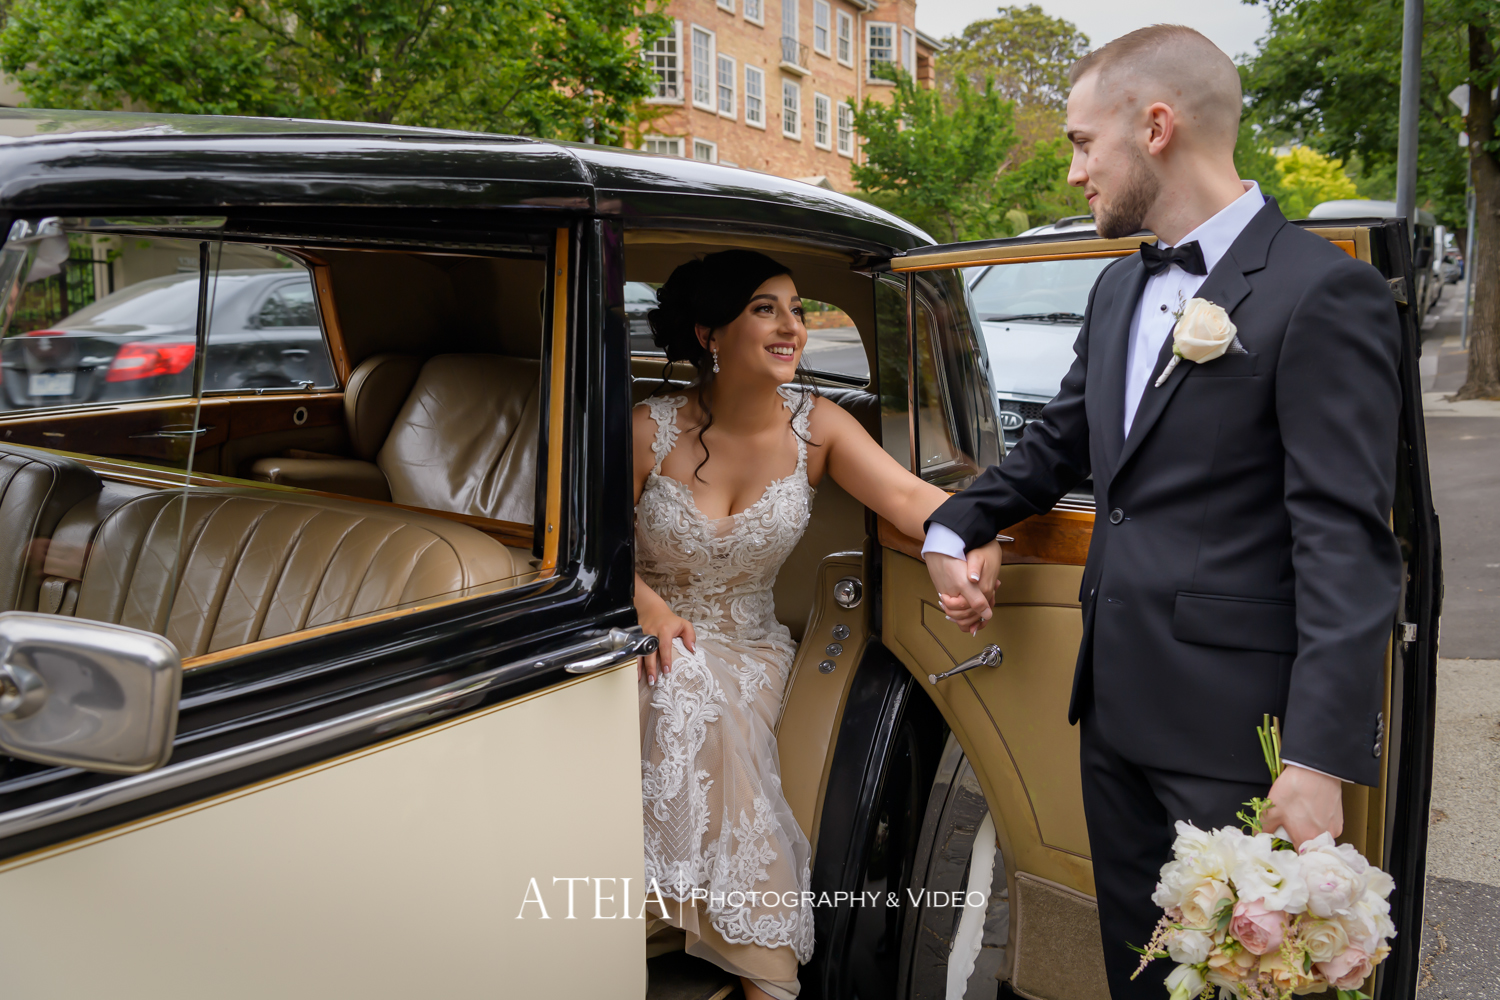 , The Terrace Royal Botanical Gardens Wedding Photography by ATEIA Photography &#038; Video